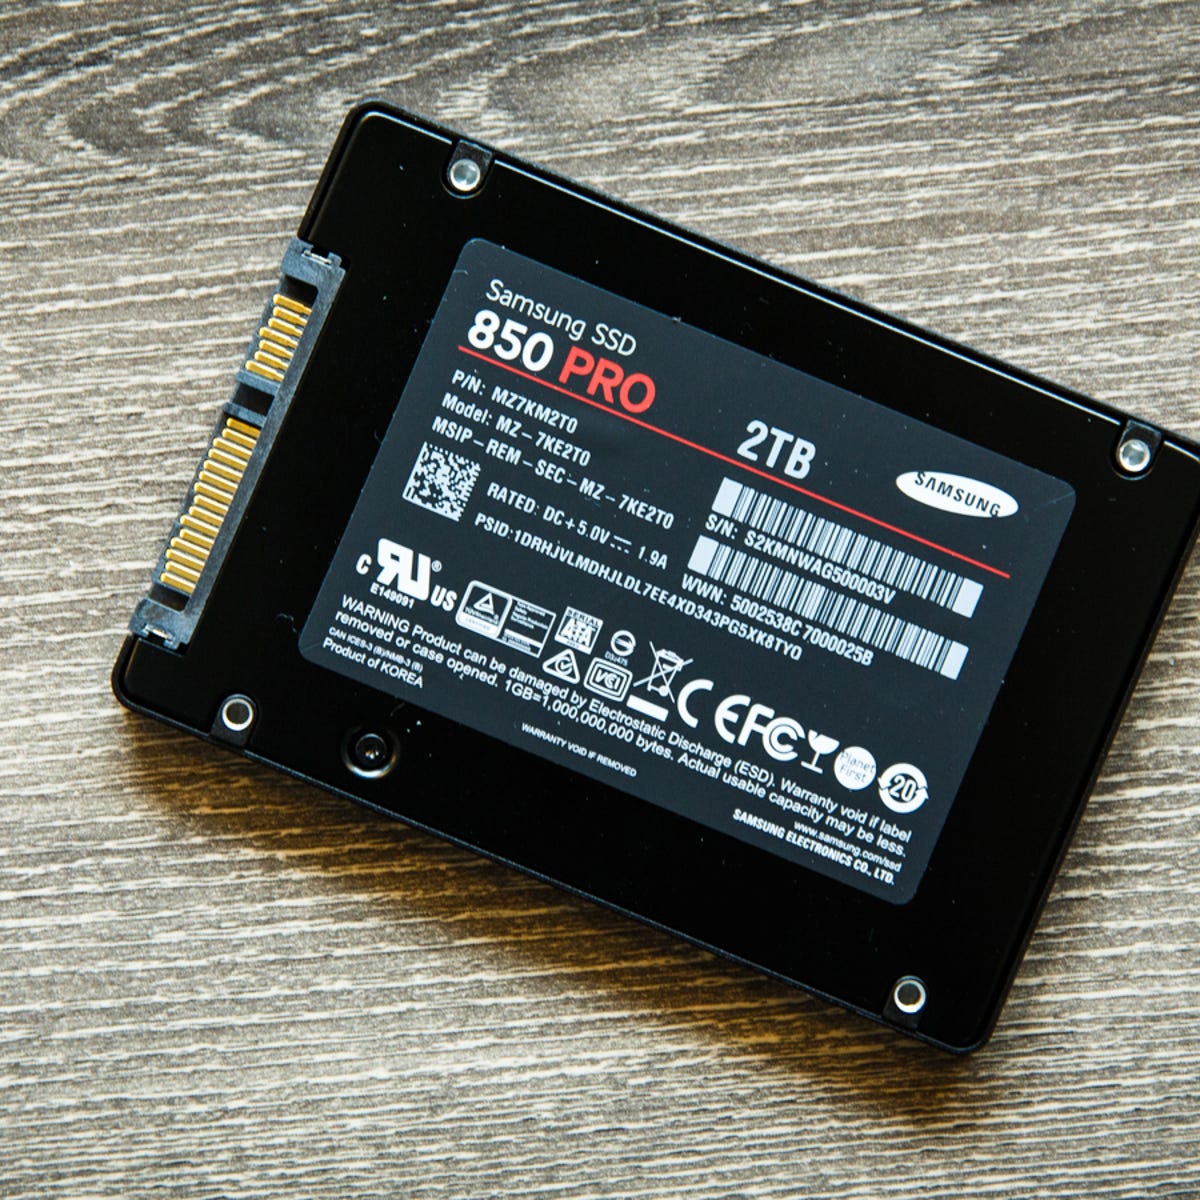 Samsung SSD Pro review: Top-notch solid-state drive for a premium price - CNET